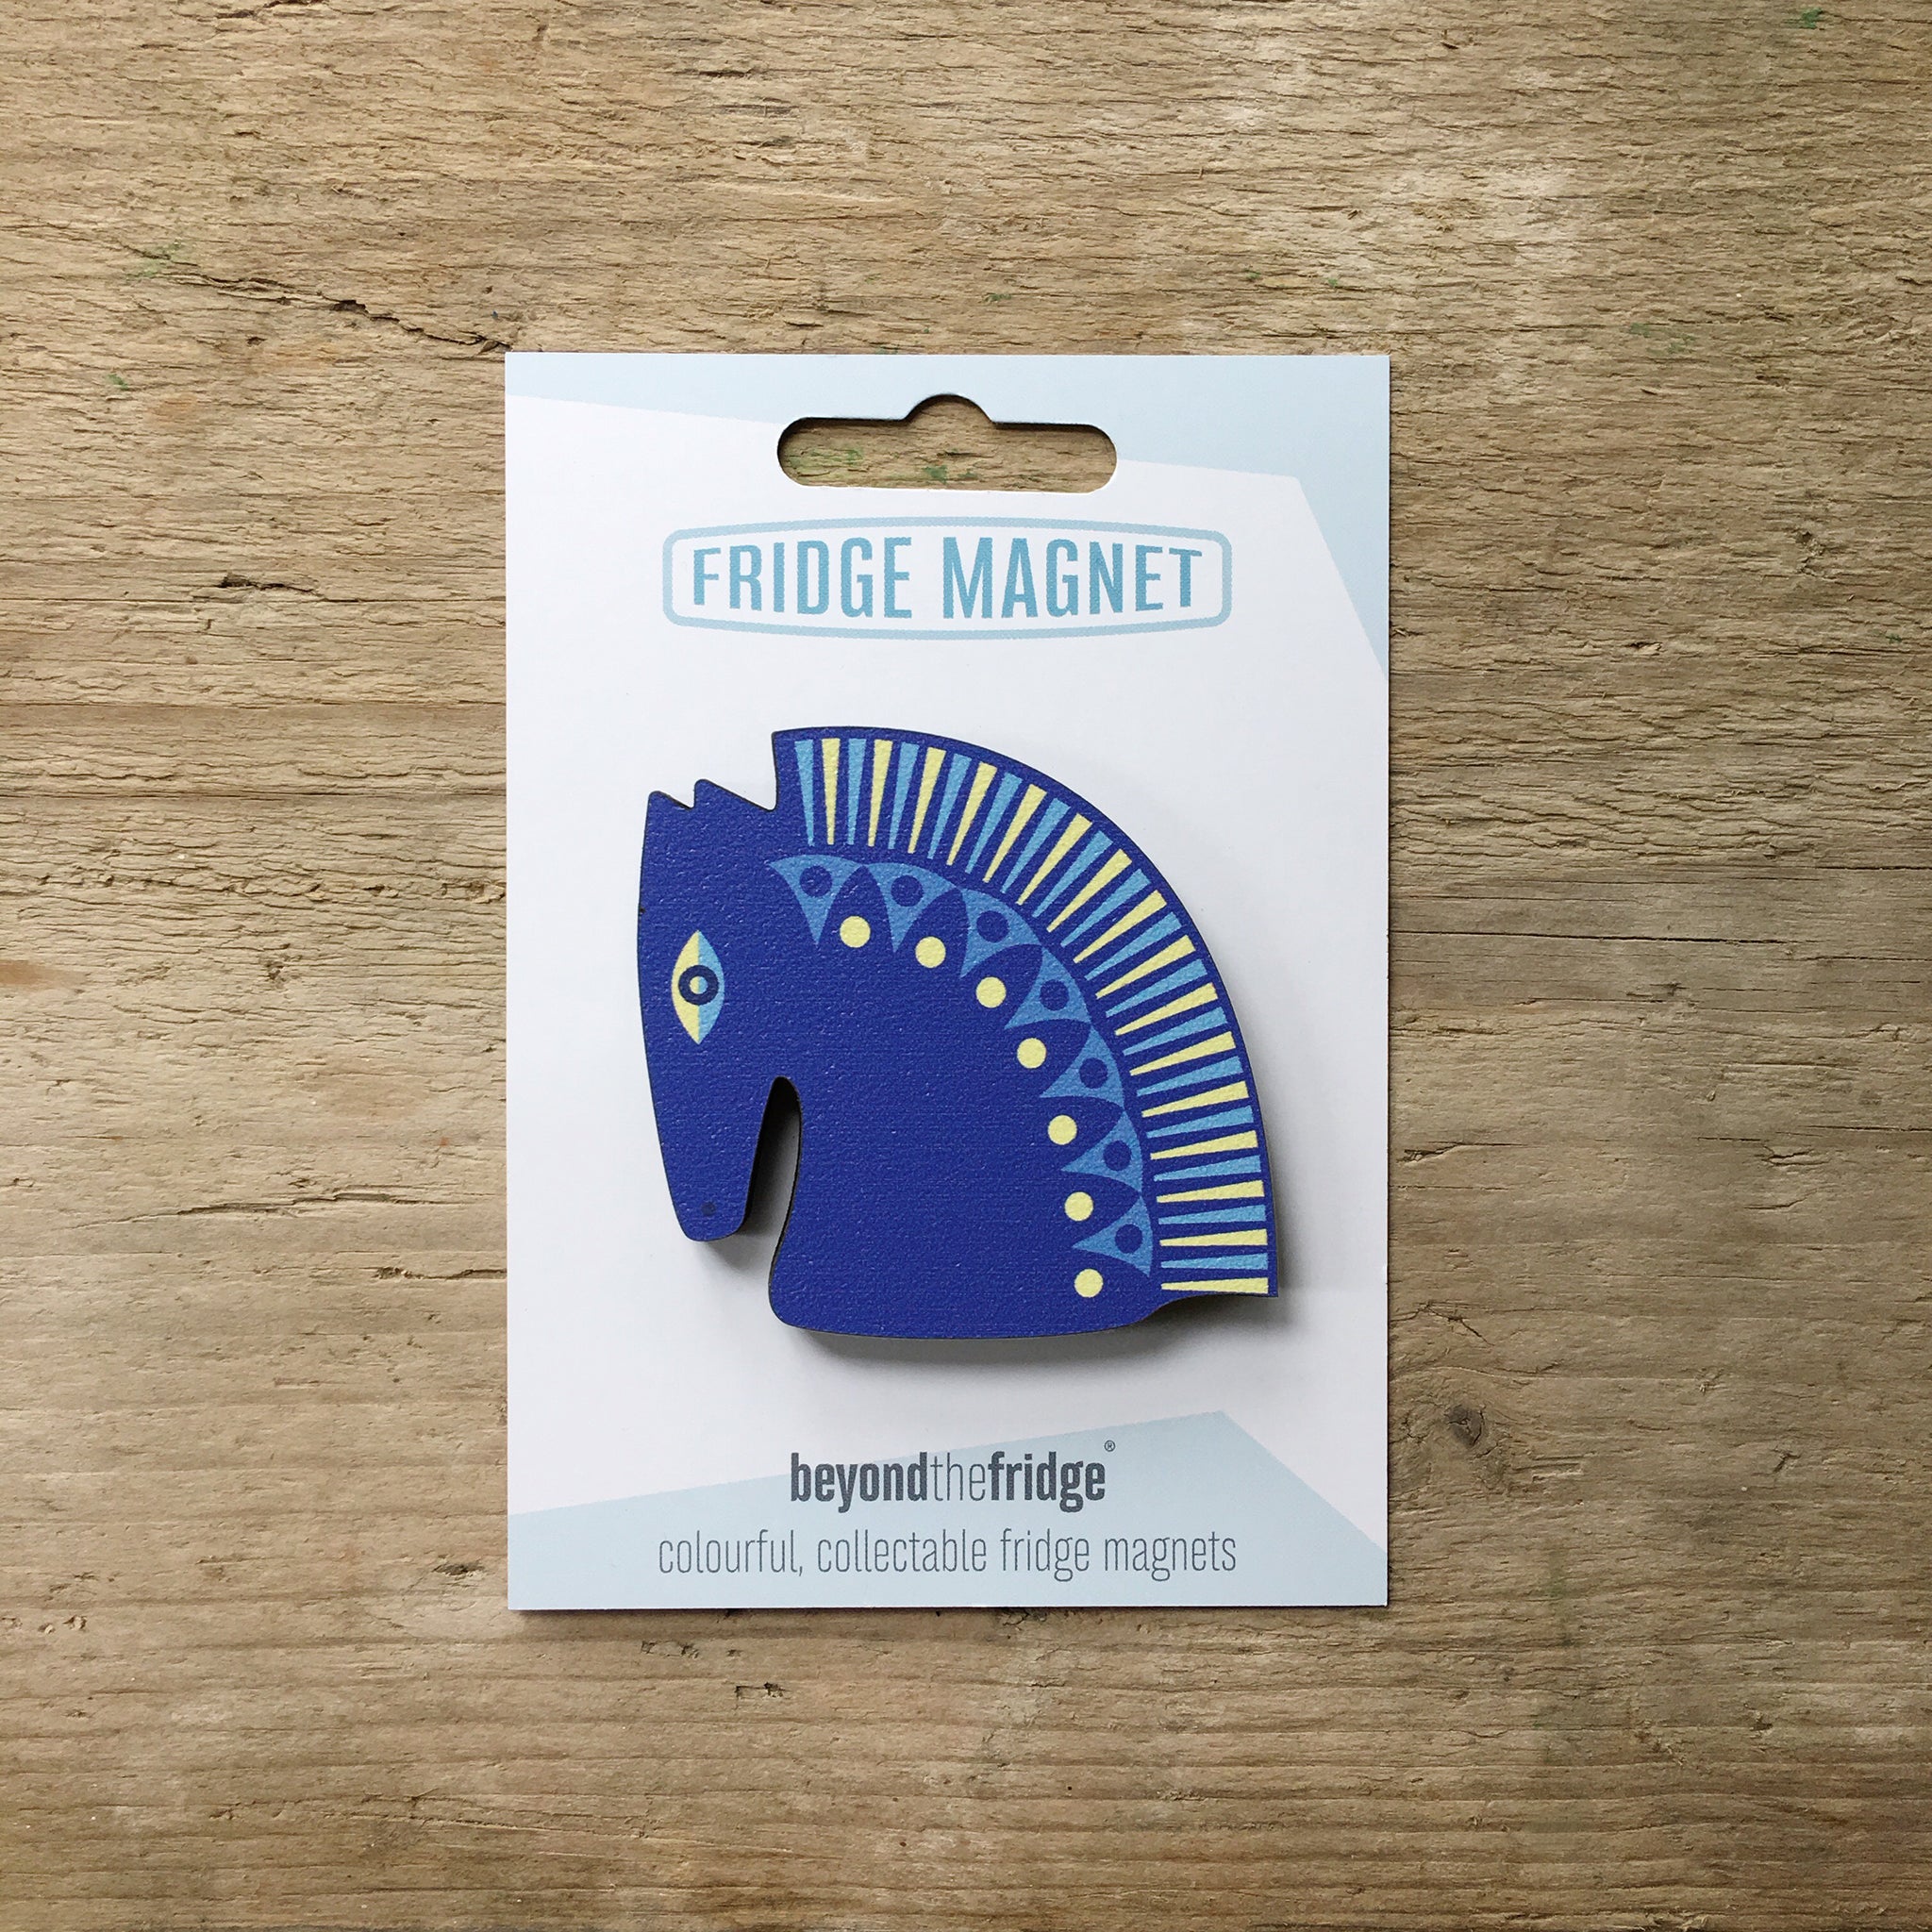 A blue horse head design plywood fridge magnet by Beyond the Fridge in it’s pack on a wooden background